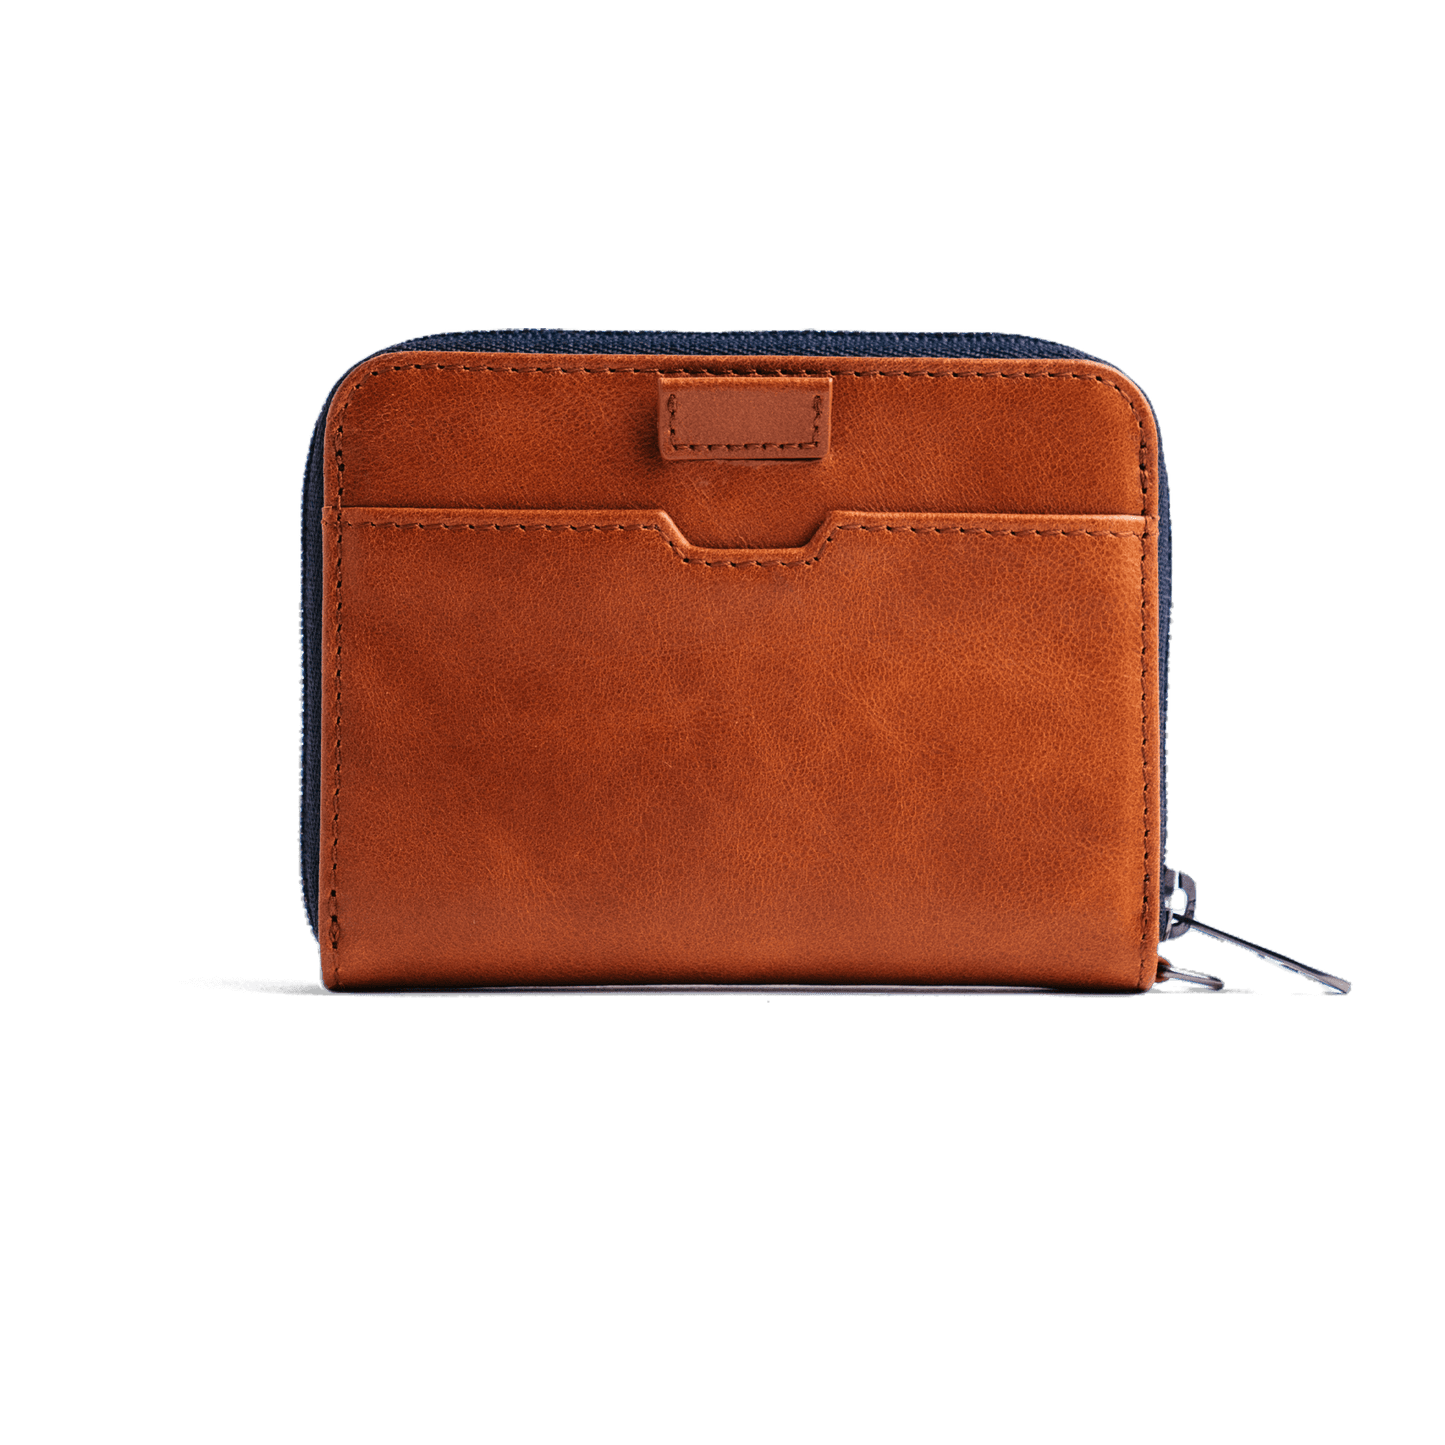 Mayfair wallet soft leather texture